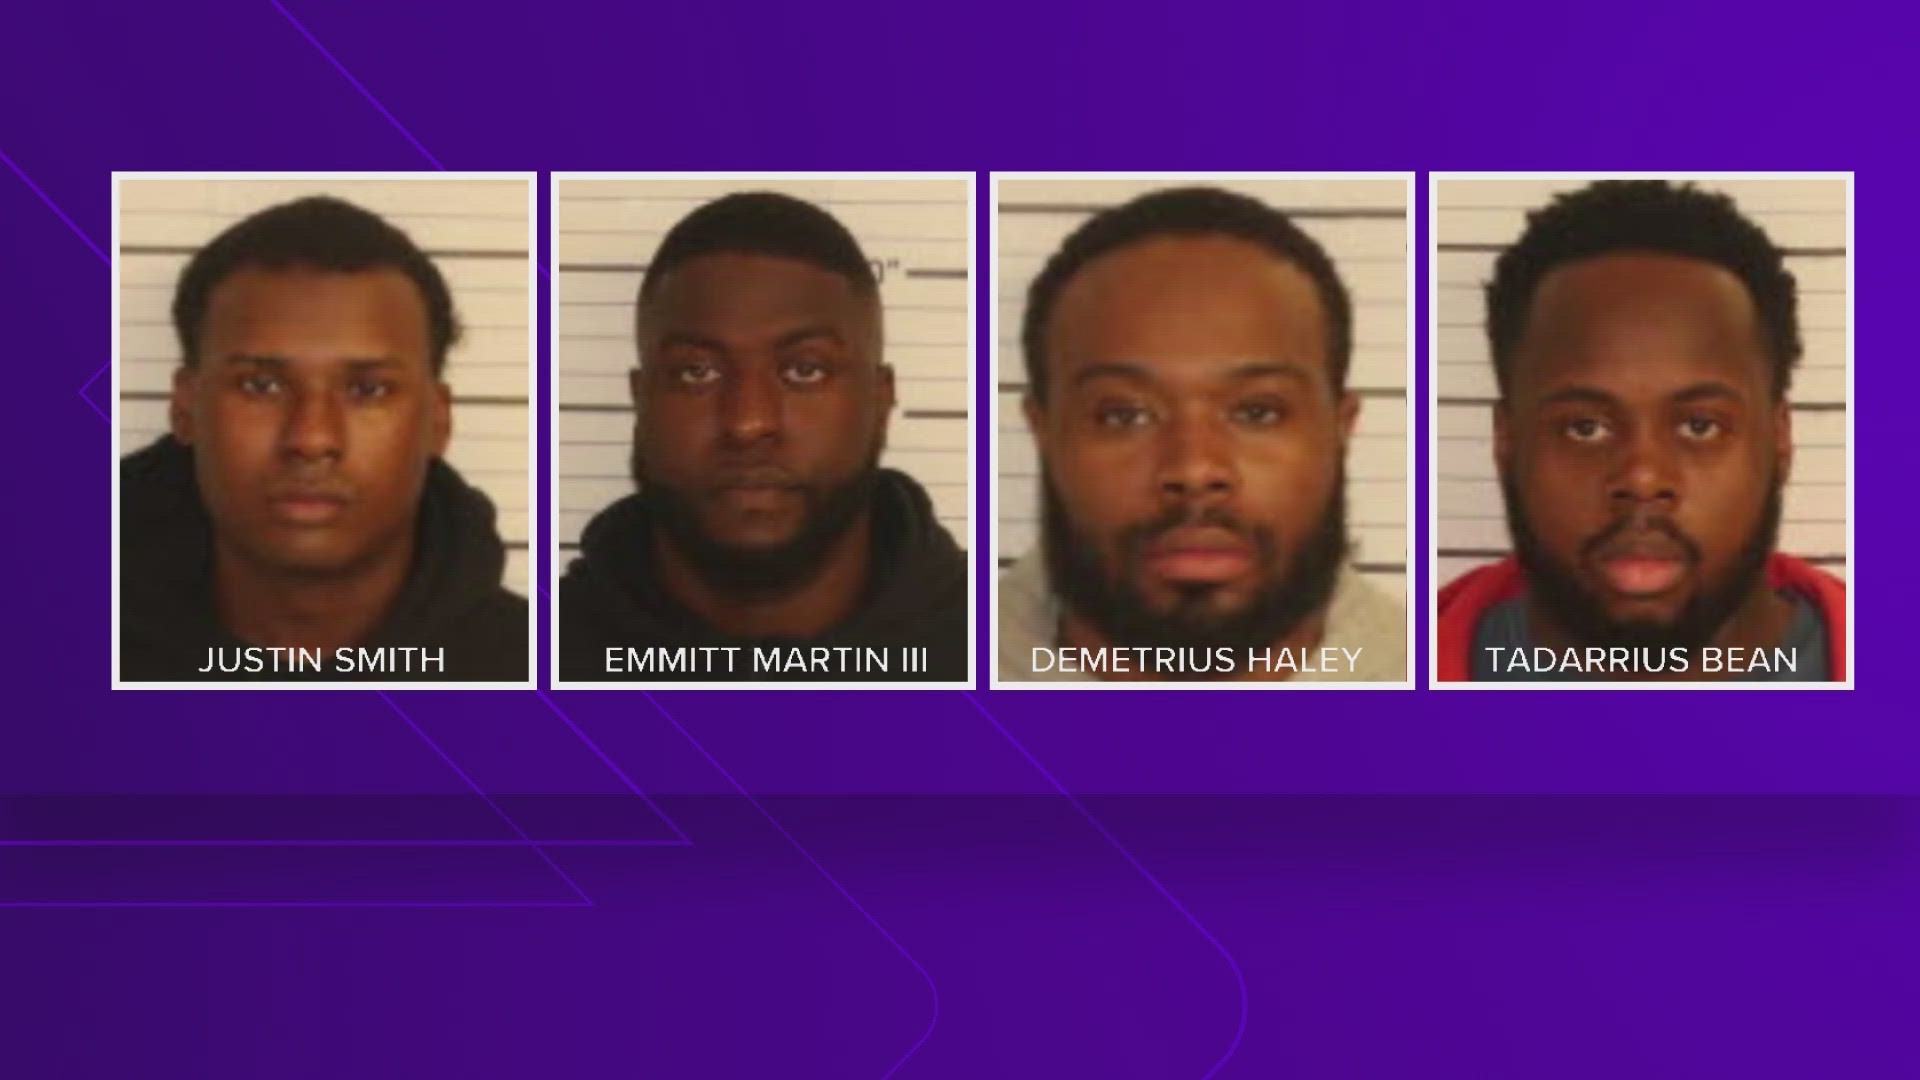 With Desmond Mills now pleading guilty to federal charges, new questions are arising on how it may impact the other four ex-Memphis Police officers.